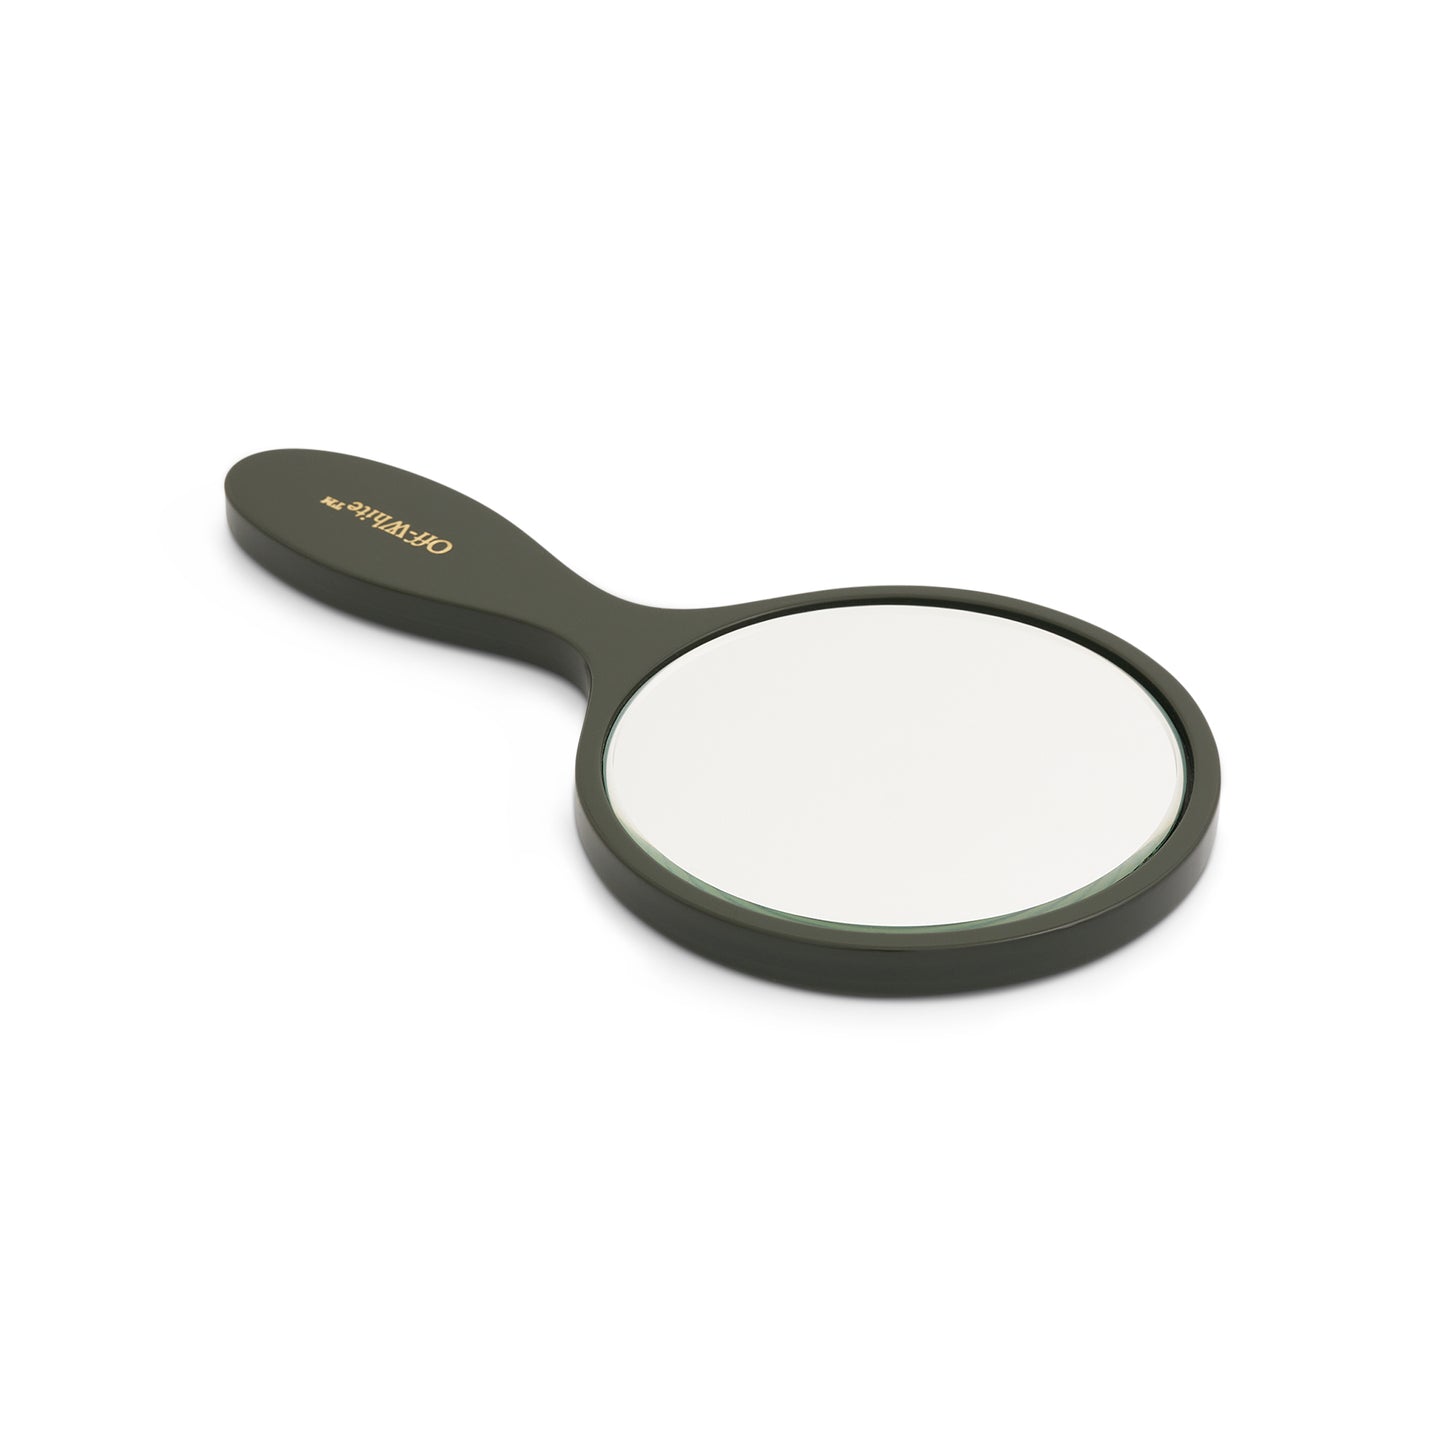 Bookish Hand Mirror in Army Green